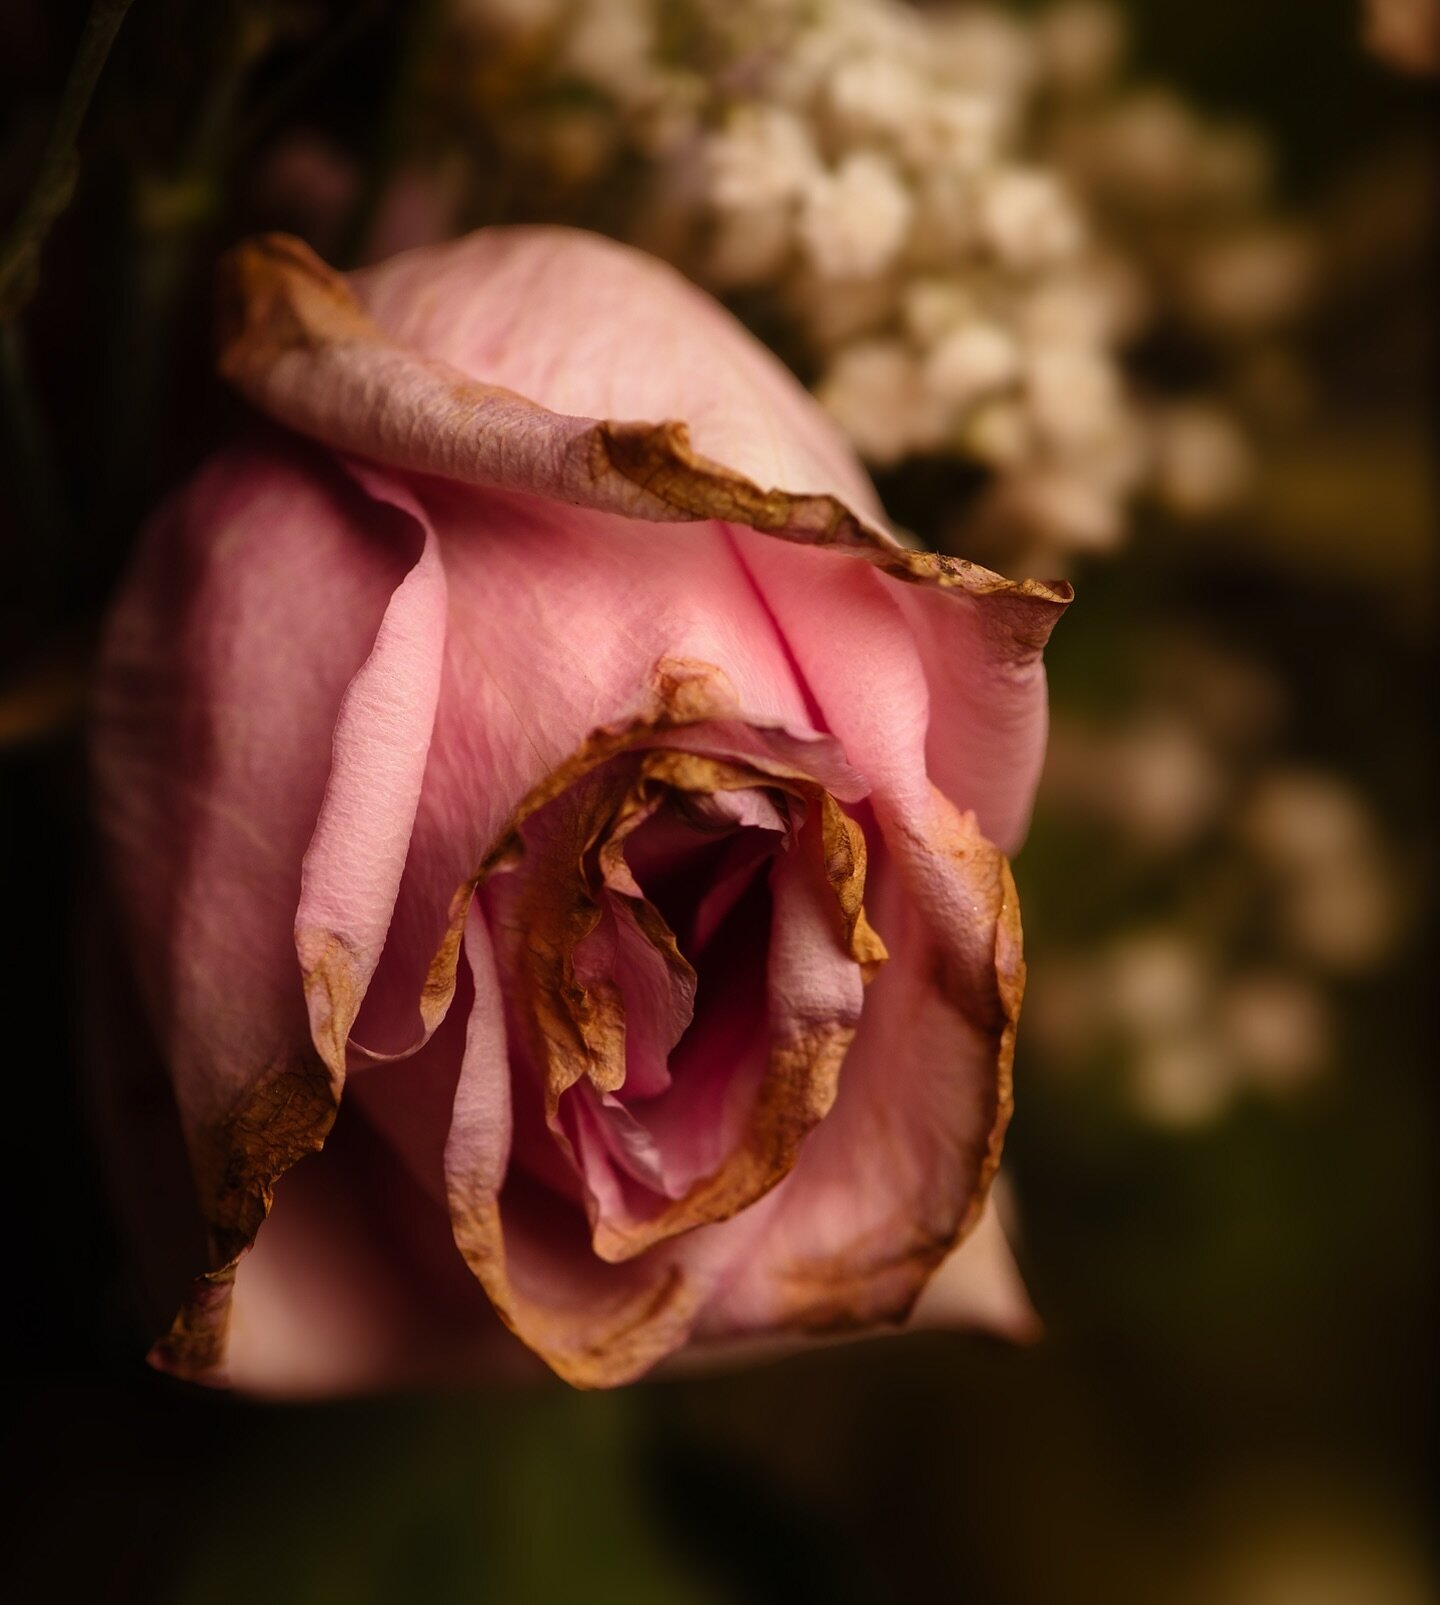 Sometimes, we all feel a bit like this wilted rose &ndash; weathered by time, yet still beautiful in our own way. Life&rsquo;s ups and downs shape us, but our essence remains. 

Embrace your imperfections, for they tell a story of resilience and grow